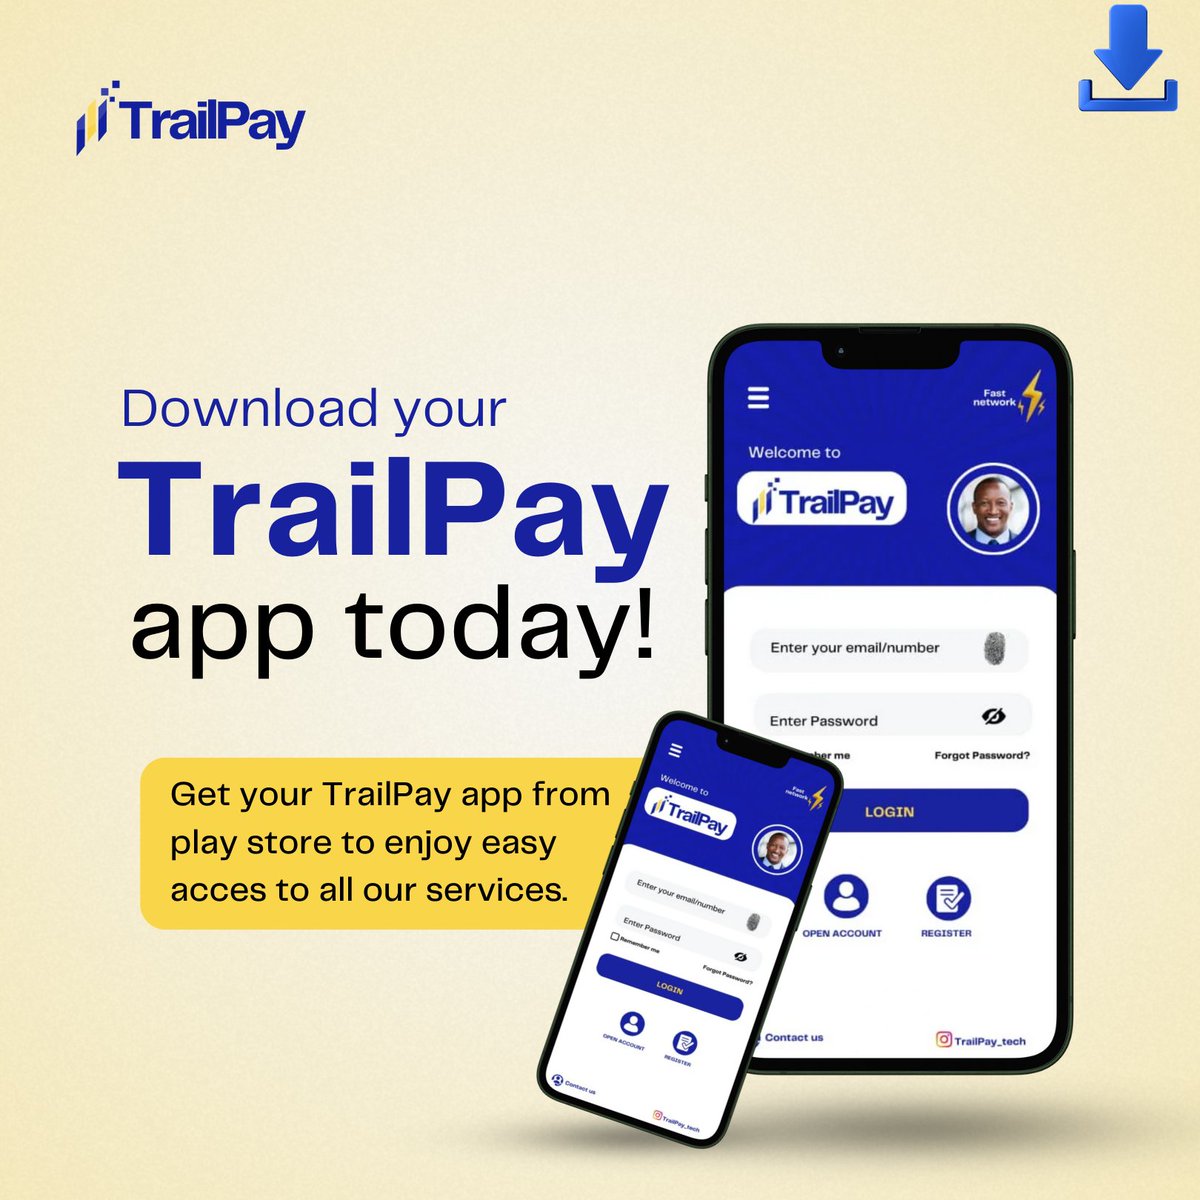 Last year, I signed up for a graphic design course at @hertechtrail to explore more skills in this field. Thank you to my coaches, @egbokavictory_ and @theestherakodu for helping me become a better designer. Here's my capstone project for Trailpay. A short thread🧵